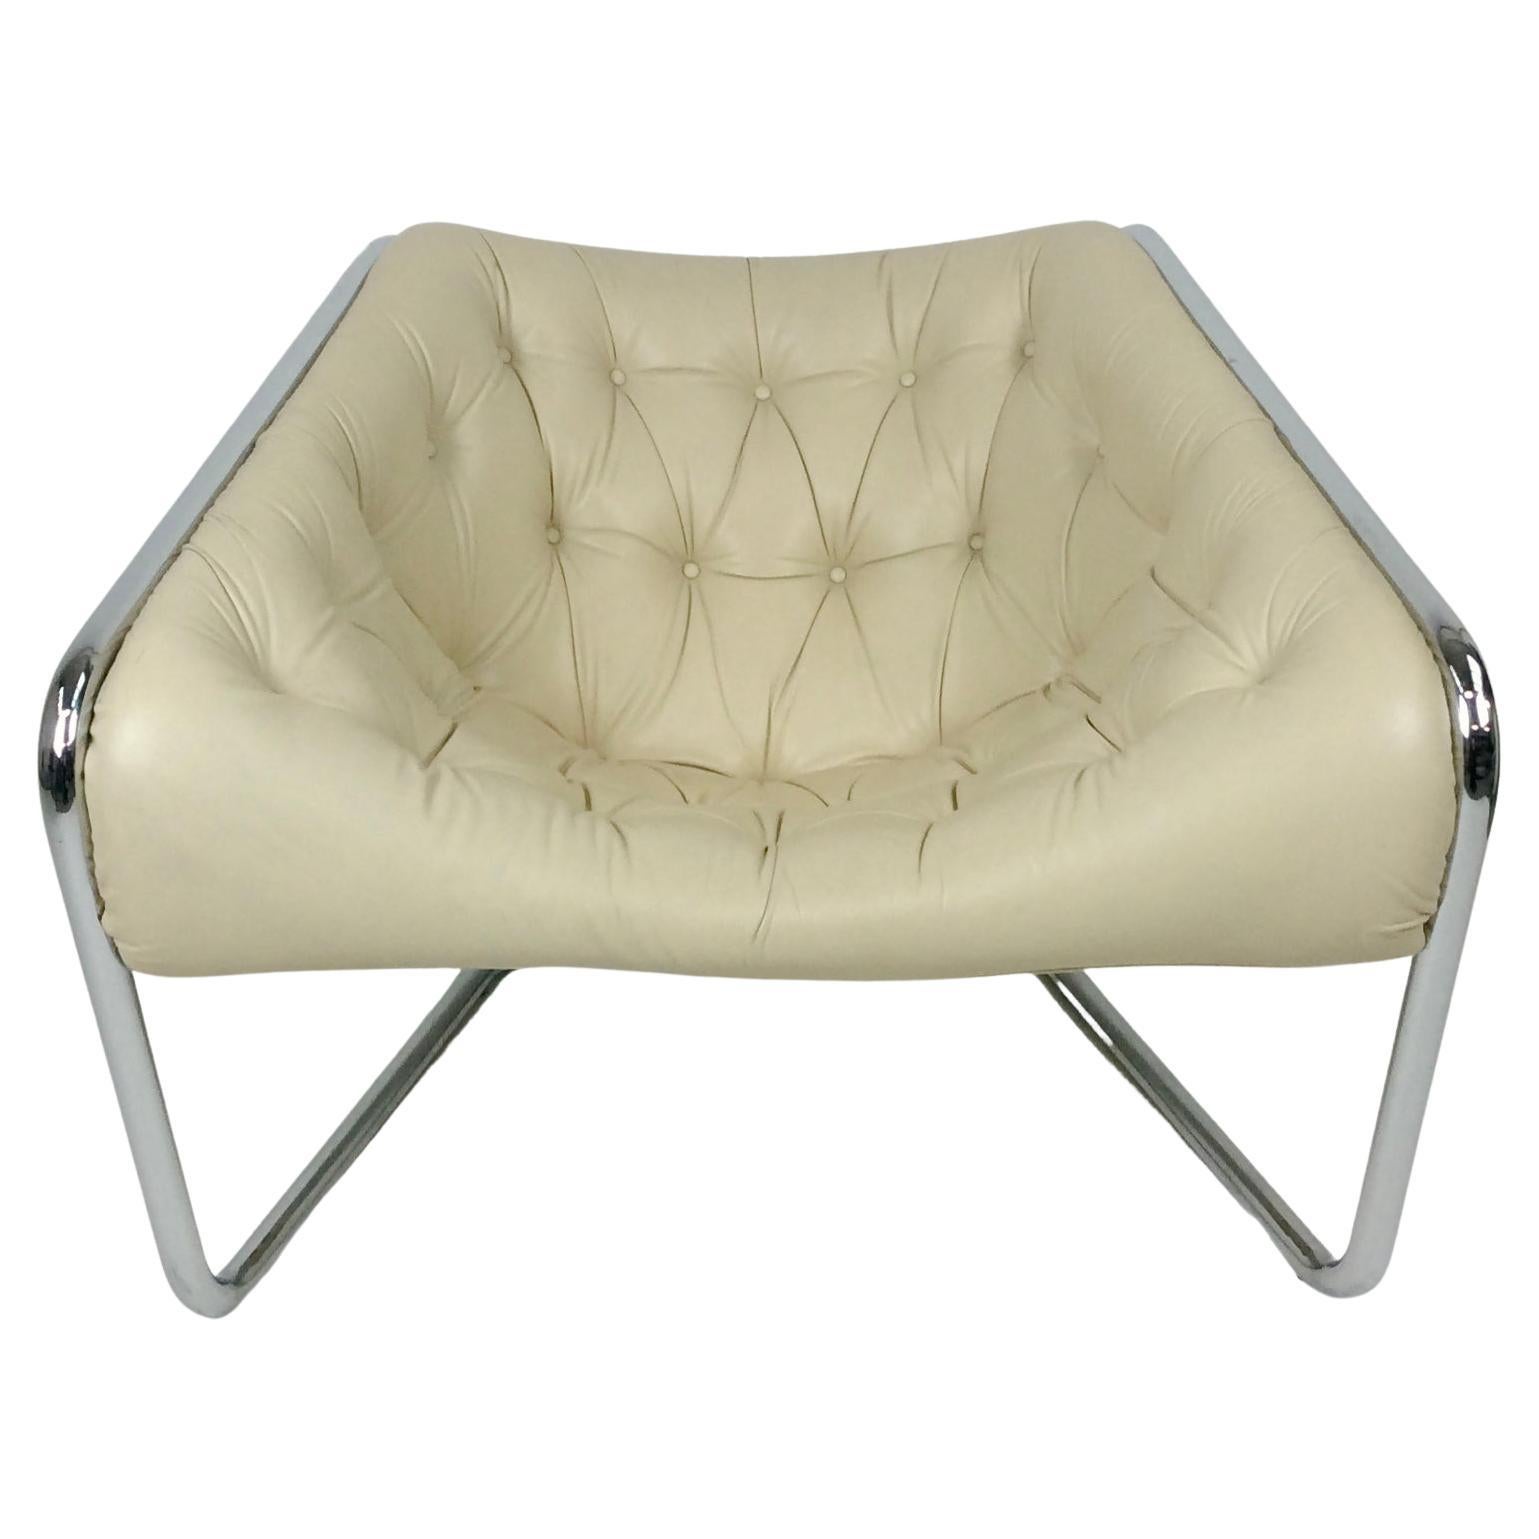 Kwok Hoi Chan Boxer Leather Lounge Chair for Steiner, circa 1971, France